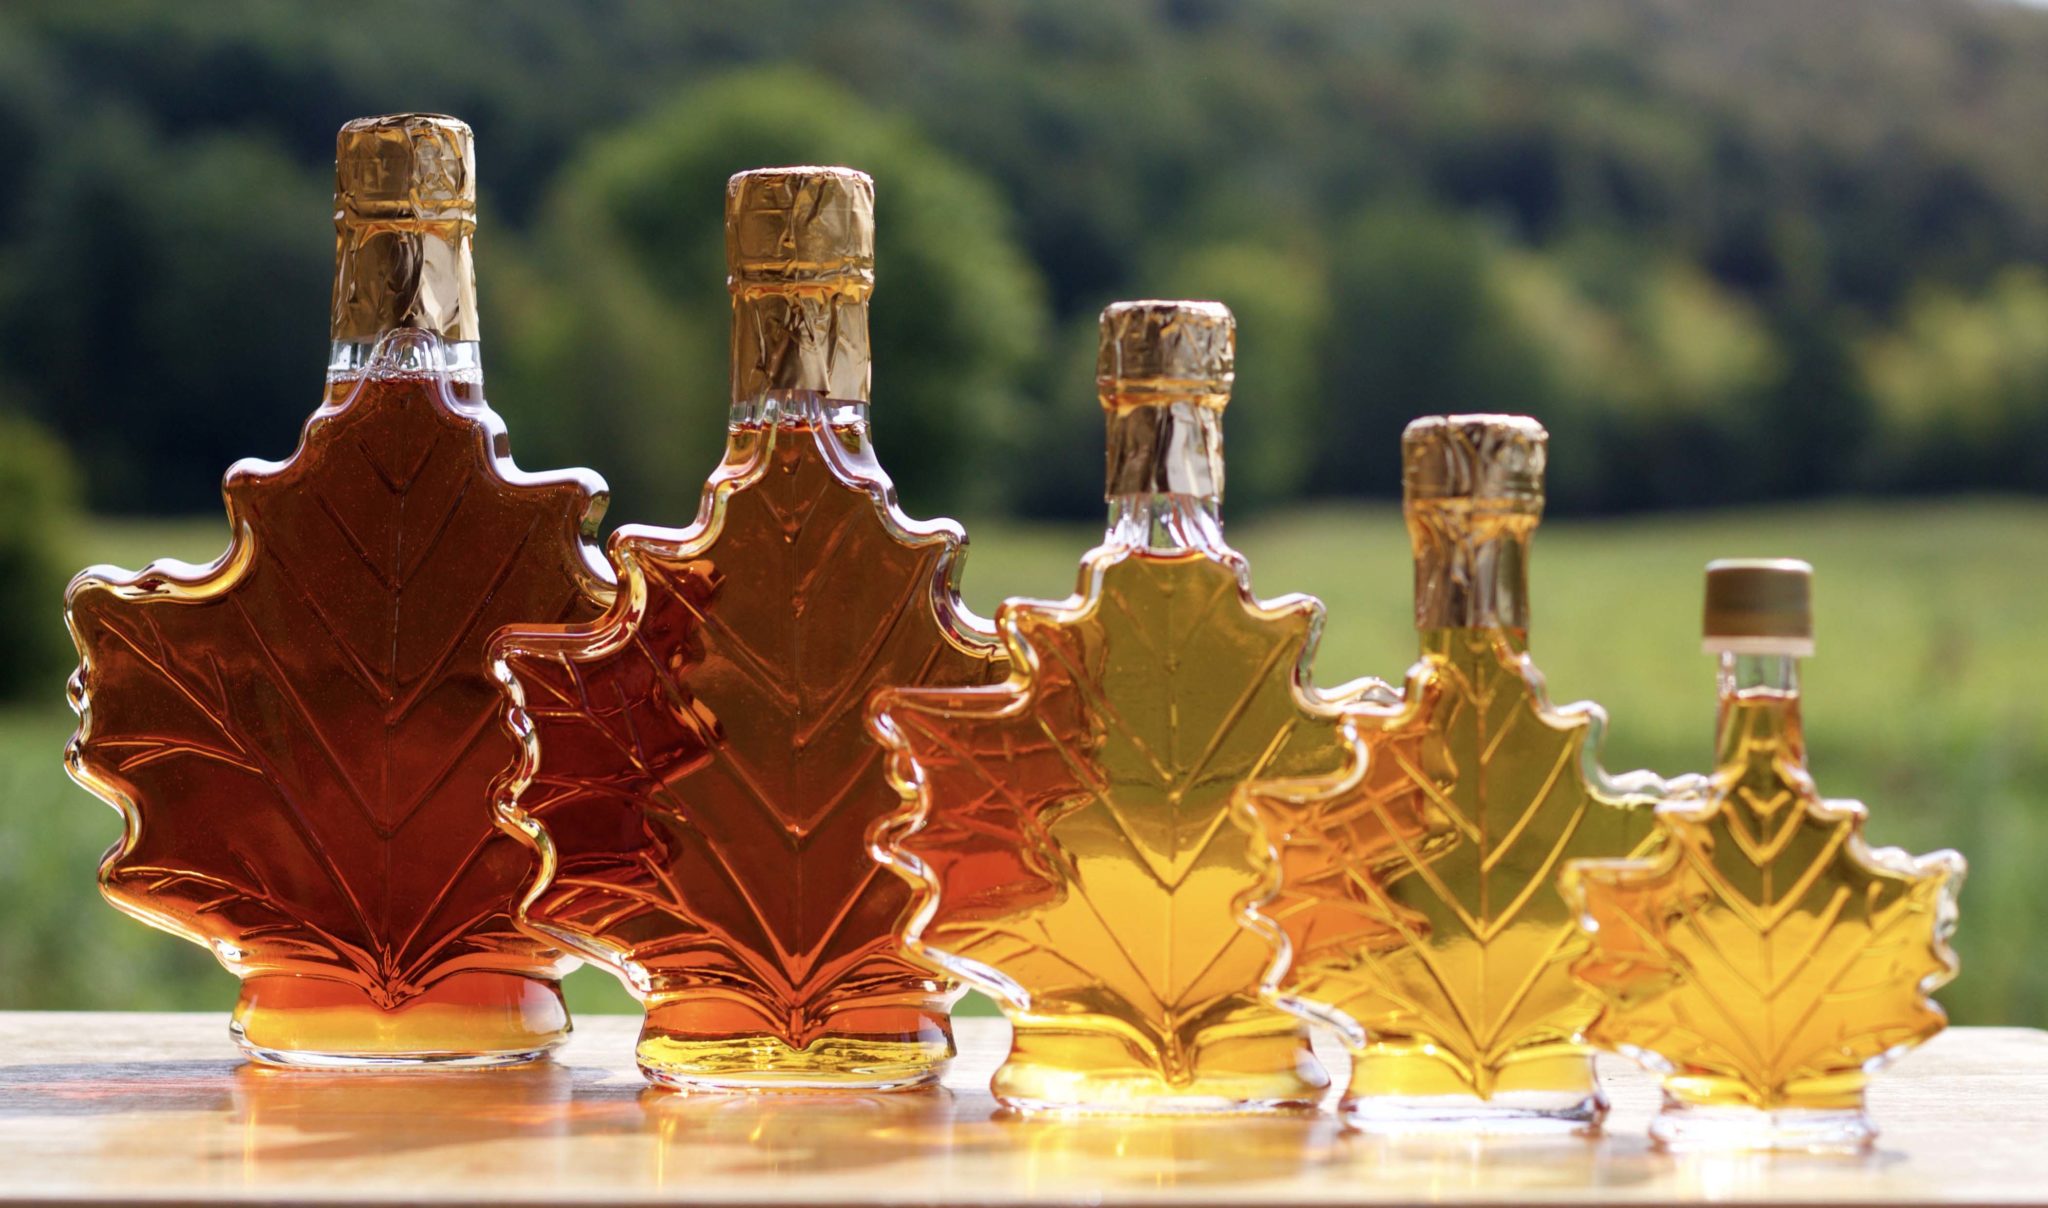 maple-syrup-top-4-health-benefits-improves-heart-health